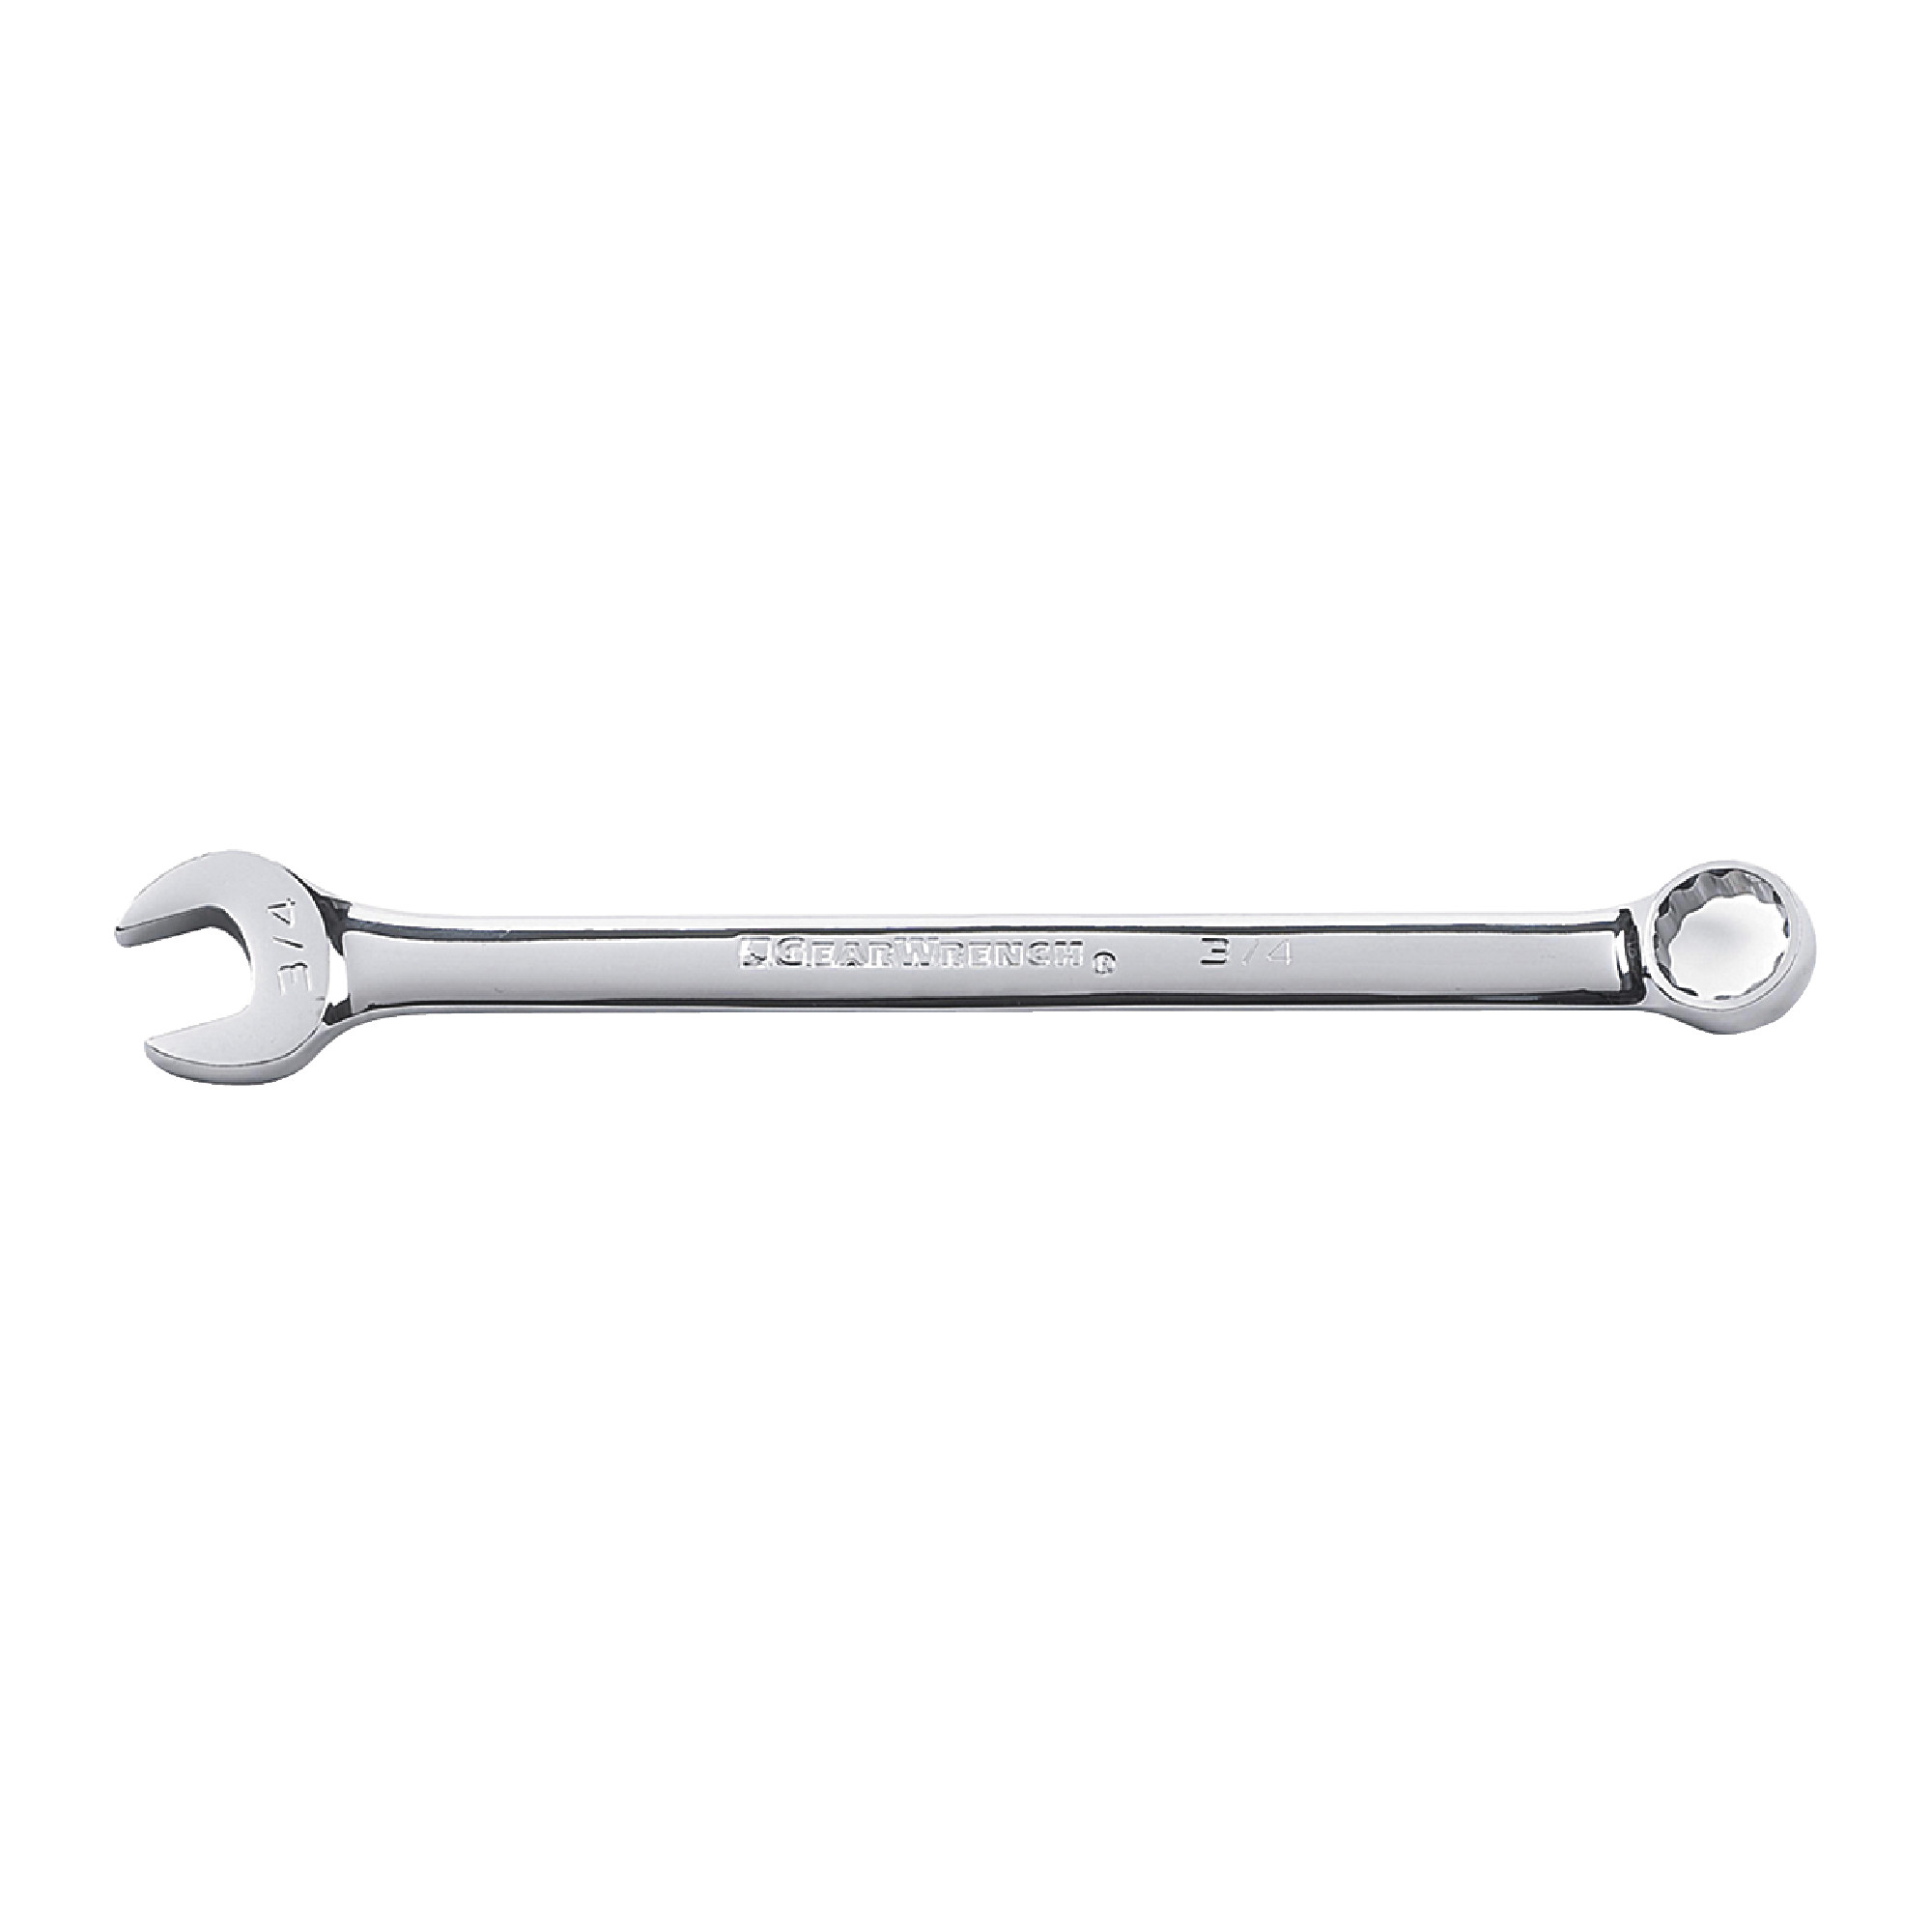 15/16" 12 Point Long Pattern Combination Wrench